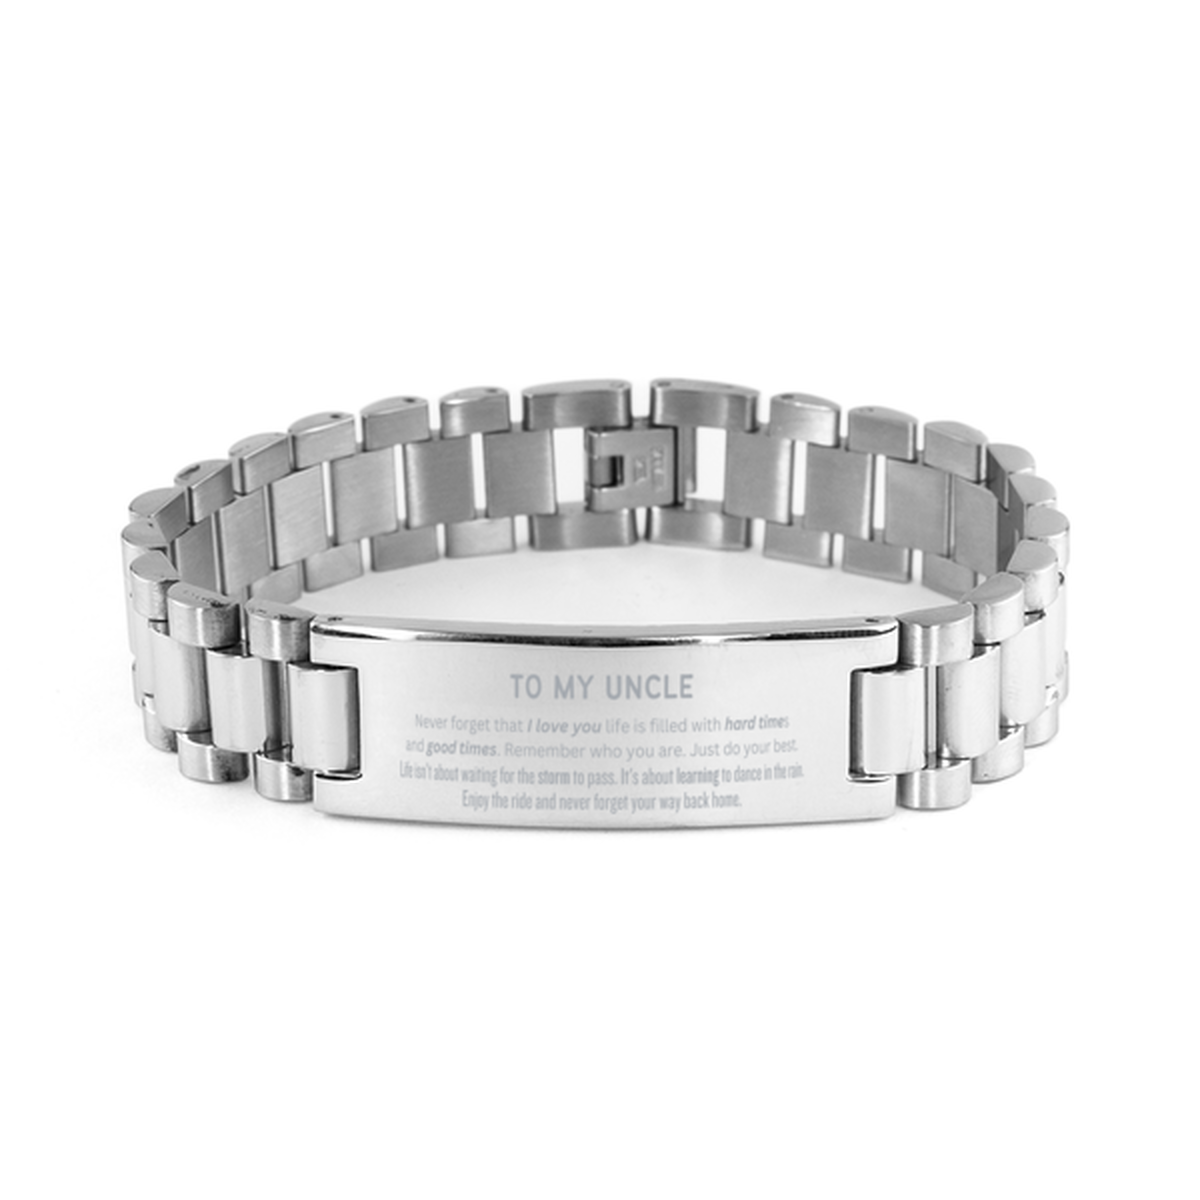 Christmas Uncle Ladder Stainless Steel Bracelet Gifts, To My Uncle Birthday Thank You Gifts For Uncle, Graduation Unique Gifts For Uncle To My Uncle Never forget that I love you life is filled with hard times and good times. Remember who you are. Just do